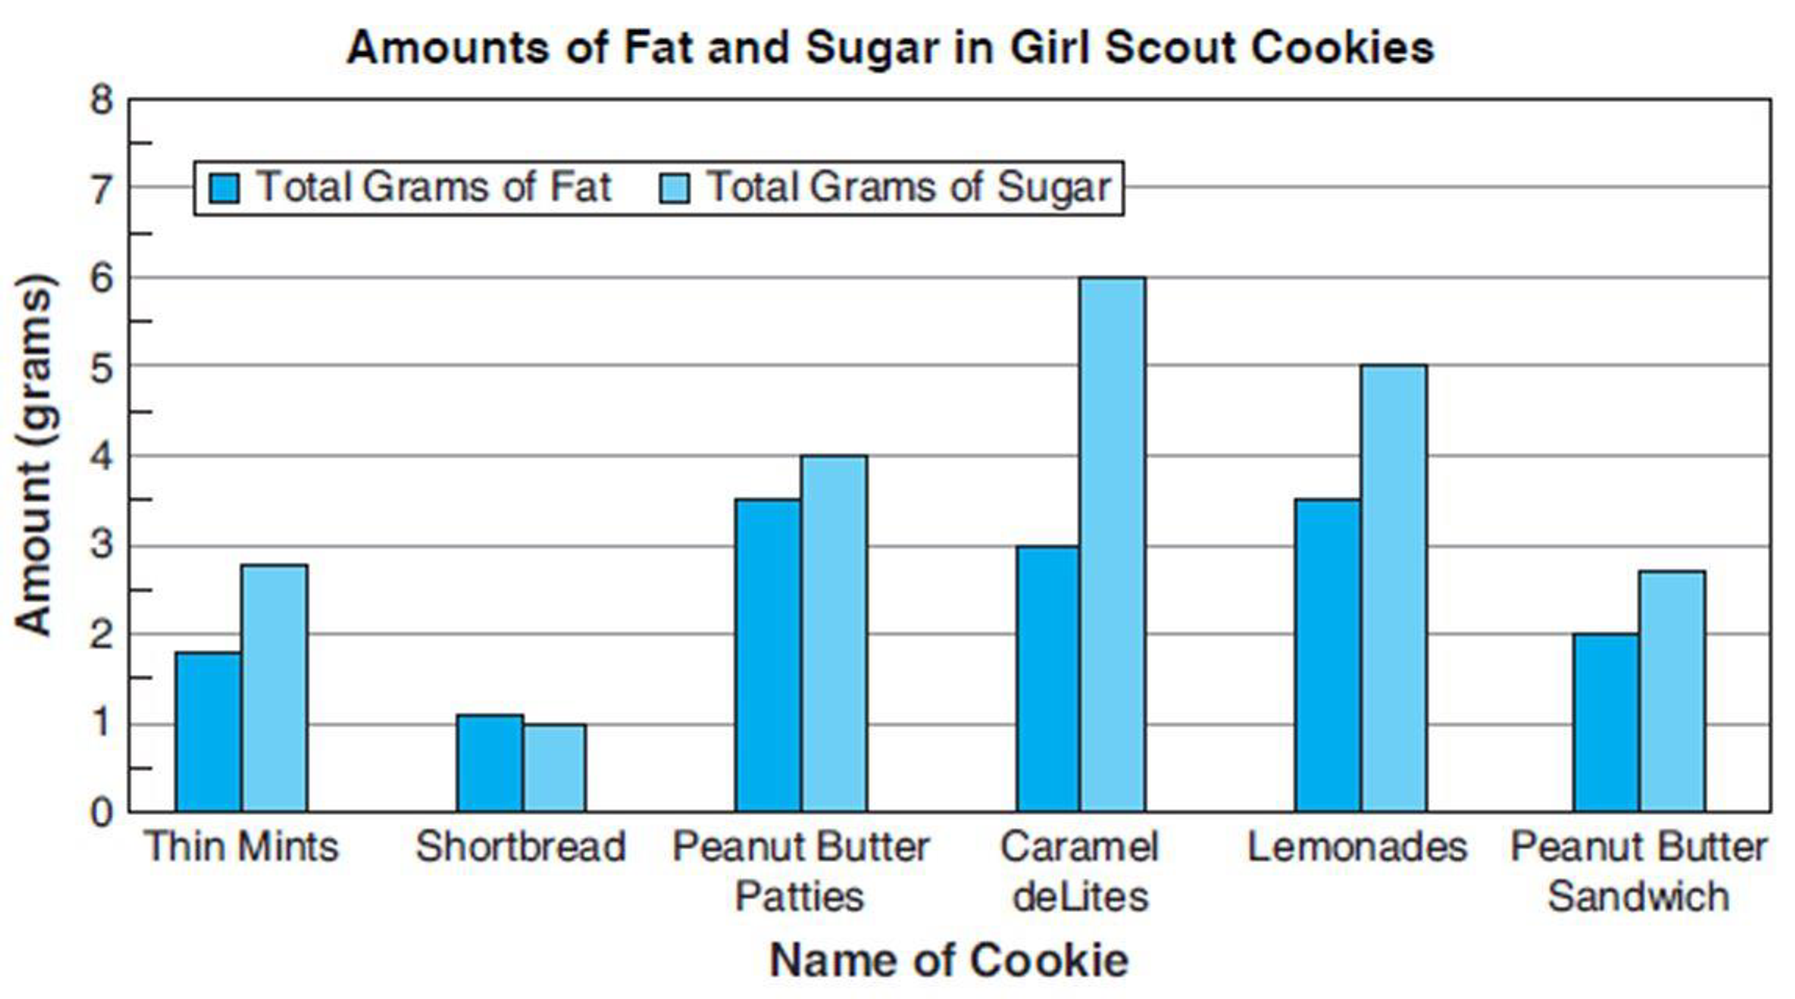 Chapter 12, Problem 8APS, How many grams of fat would you consume if you ate three Thin Mints? 